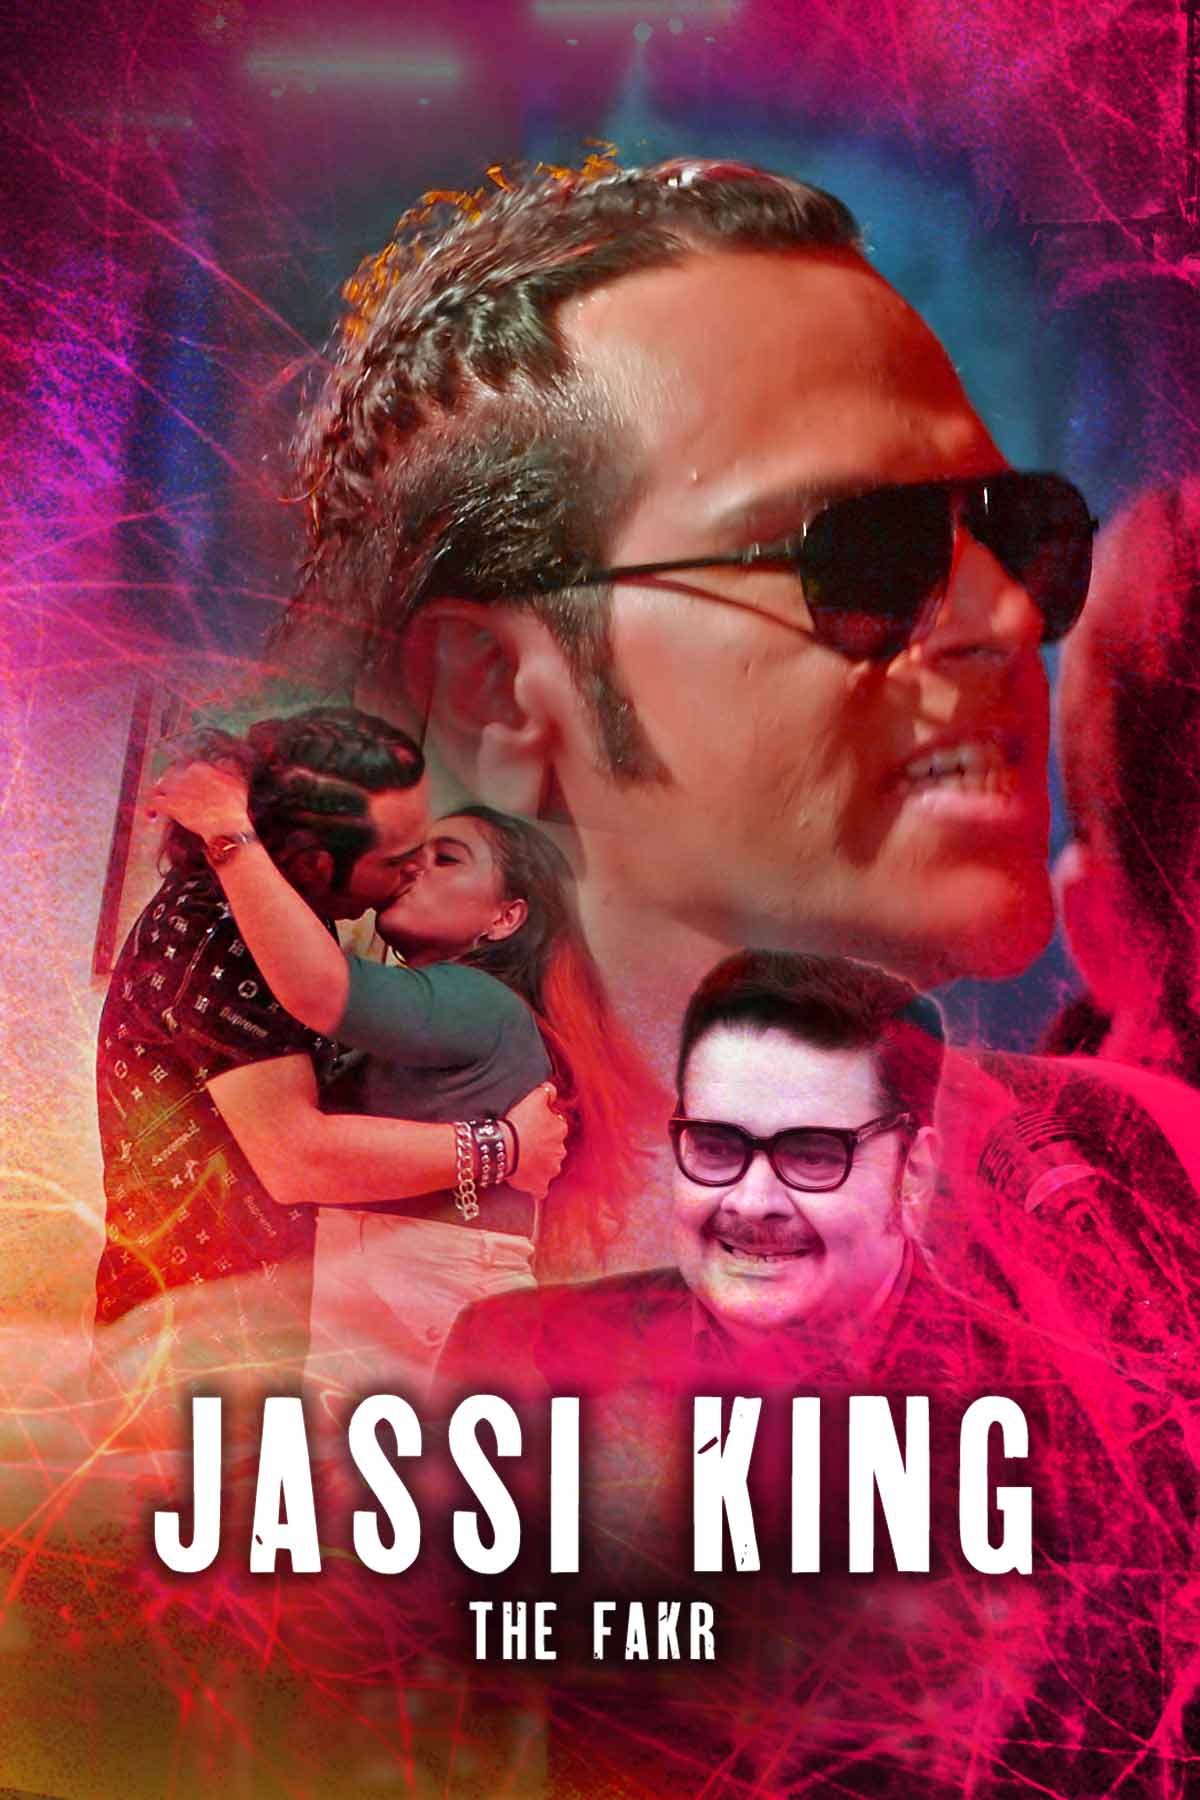 You are currently viewing 18+ Jassi King The Fakr 2020 S01 Complete Kooku Originals Hindi Web Series 720p HDRip 830MB Download & Watch Online